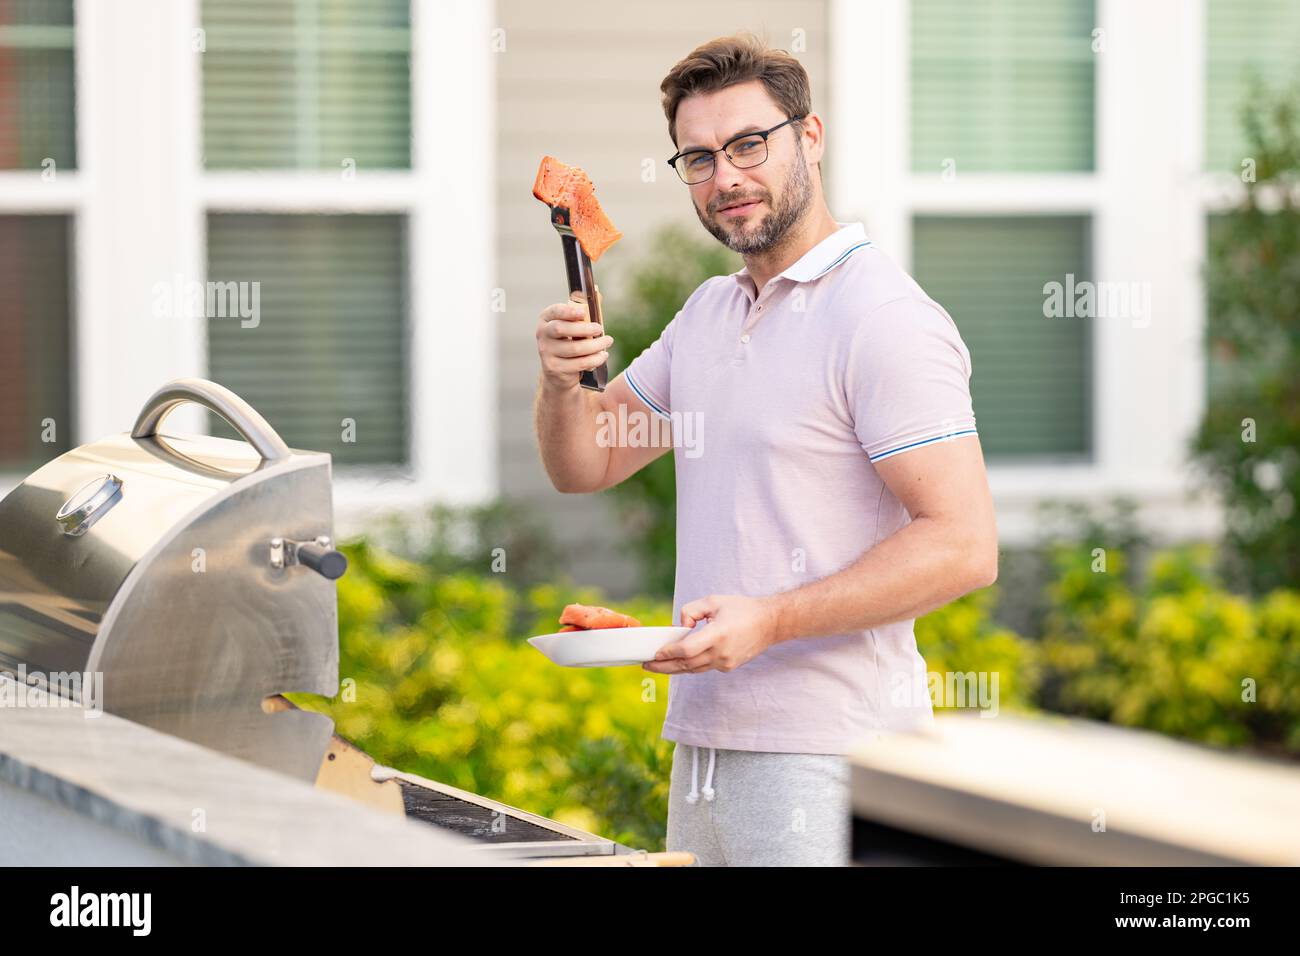 Cook at a barbecue grill preparing salmon. Stock Photo